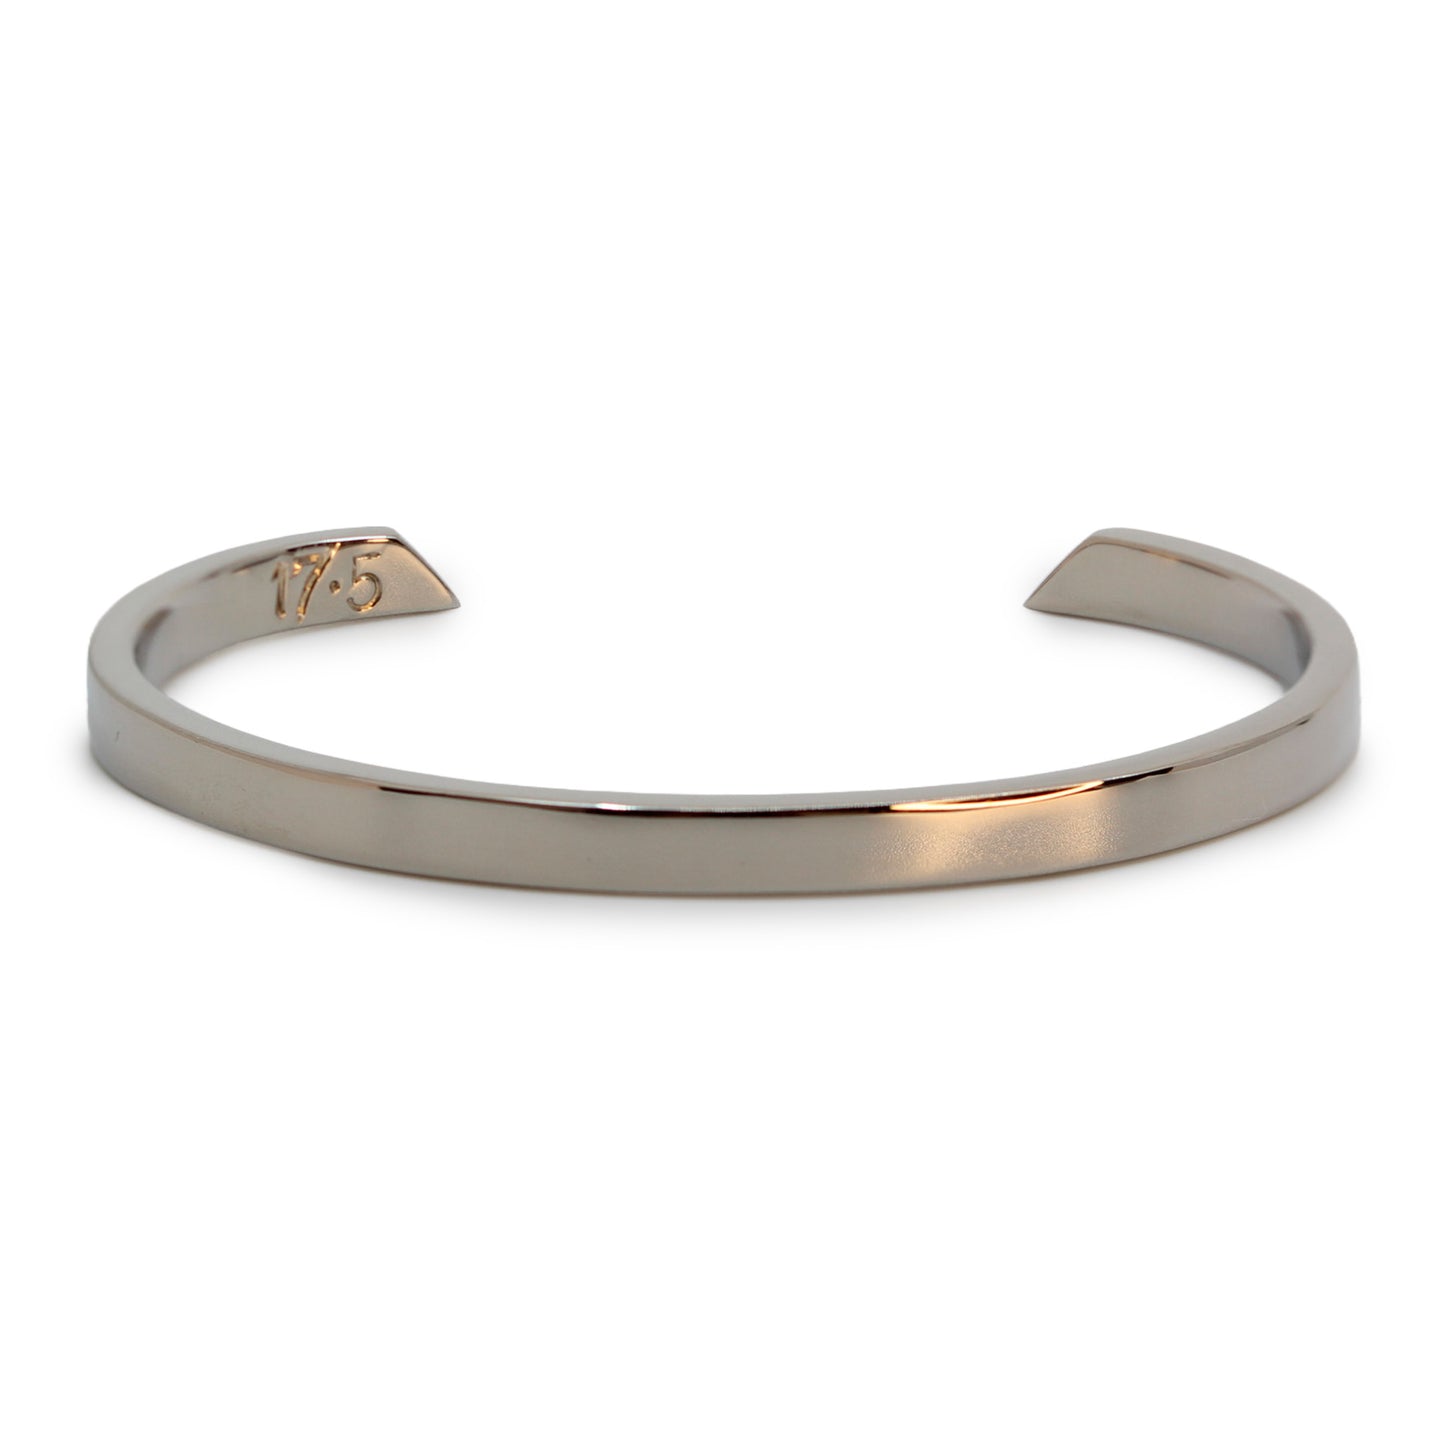 Single silver-colored titanium bangle, 5 mm wide. Image shows front view of bangle